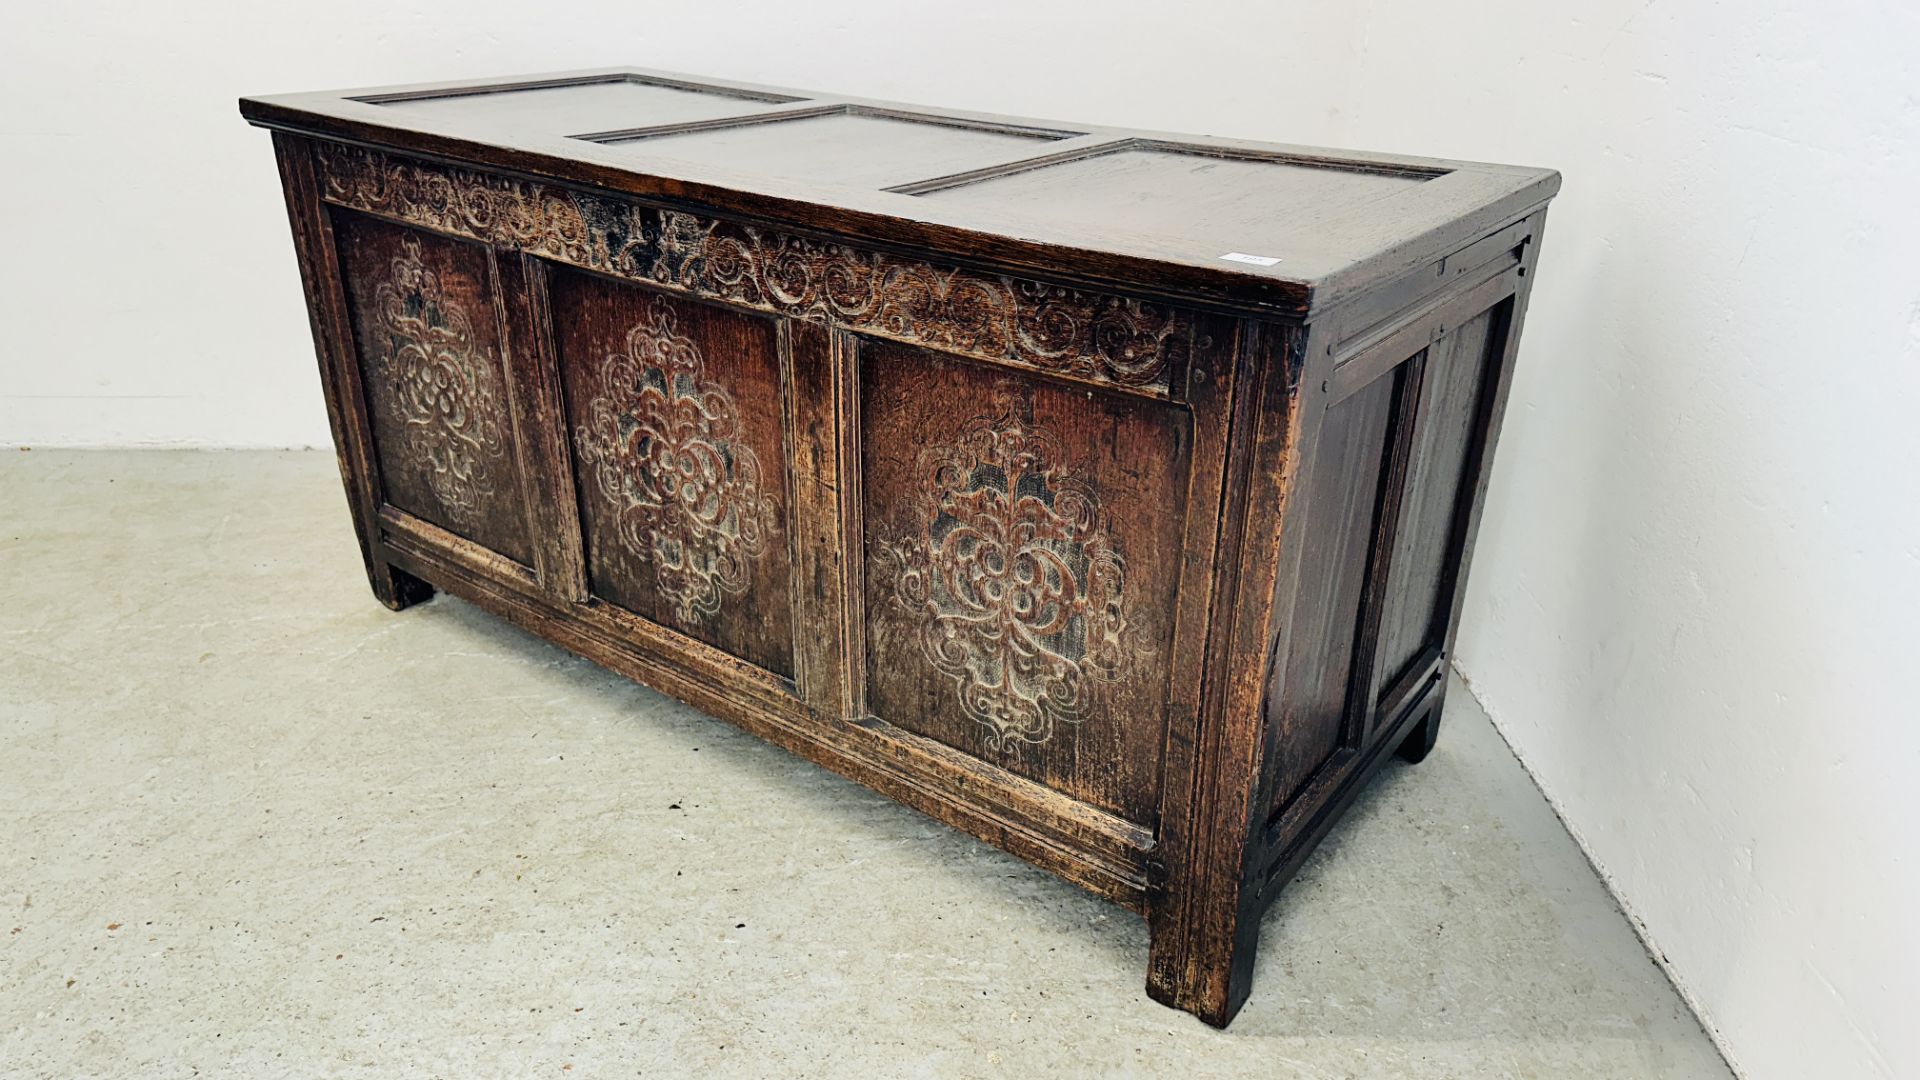 A C17th OAK COFFER, DATED 1686, WITH ALTERATIONS INCLUDING A NEW TOP, 134CM WIDE. - Image 3 of 17